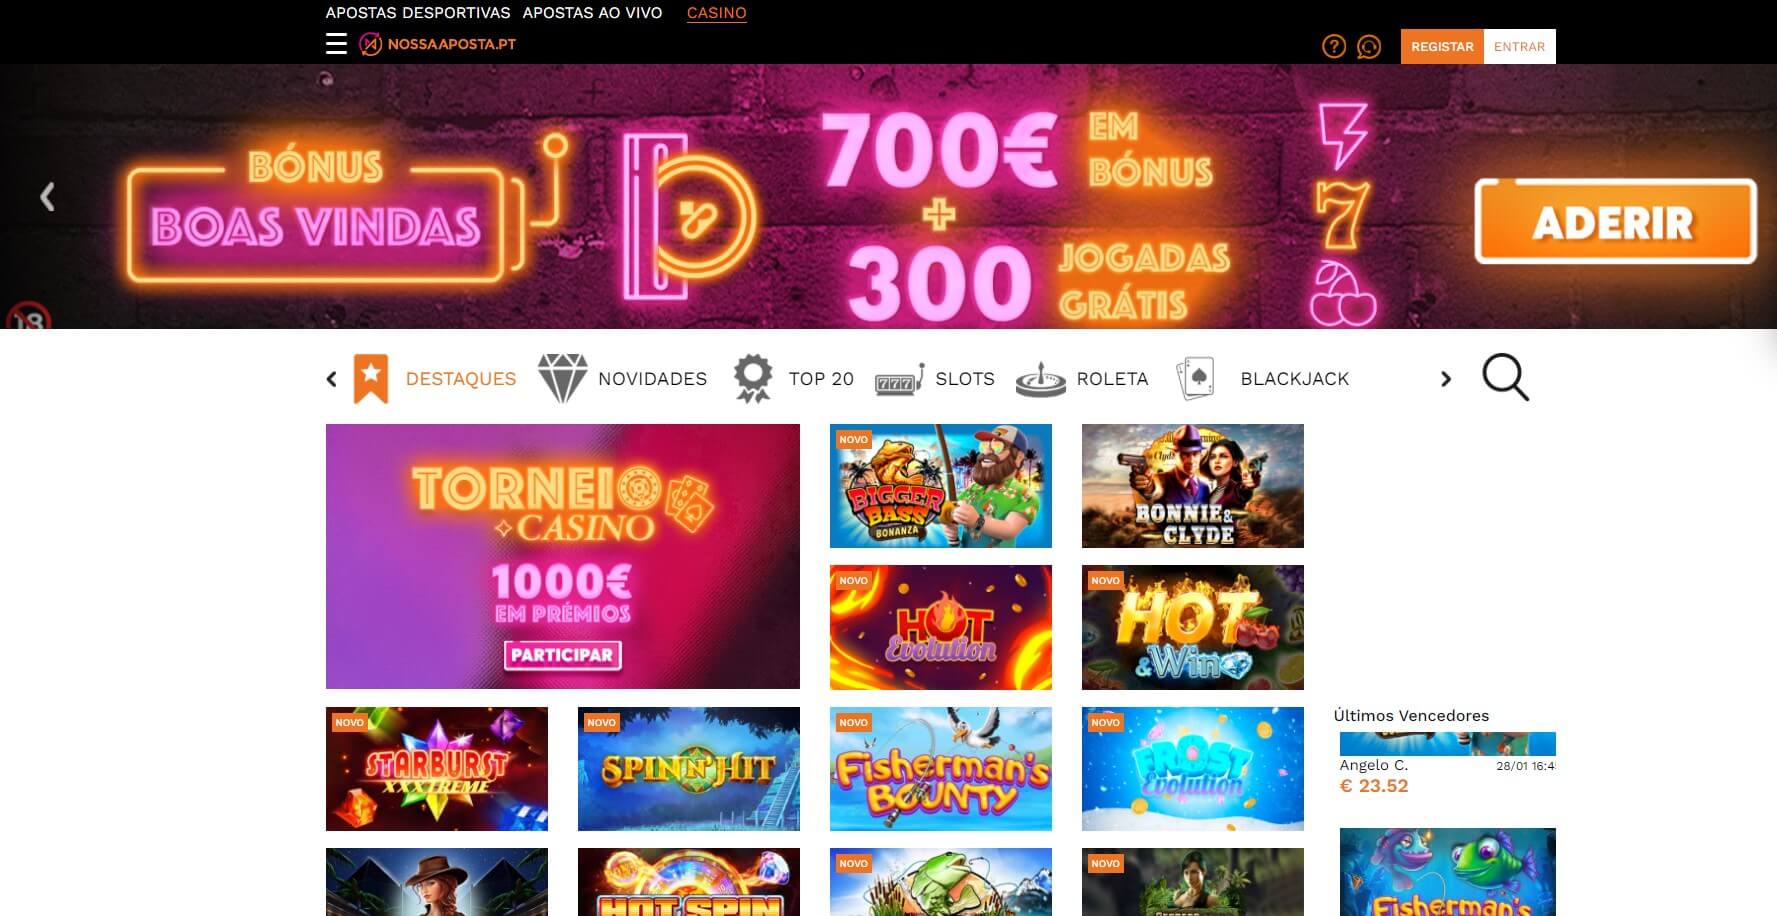 The Complete Guide To Understanding online casino